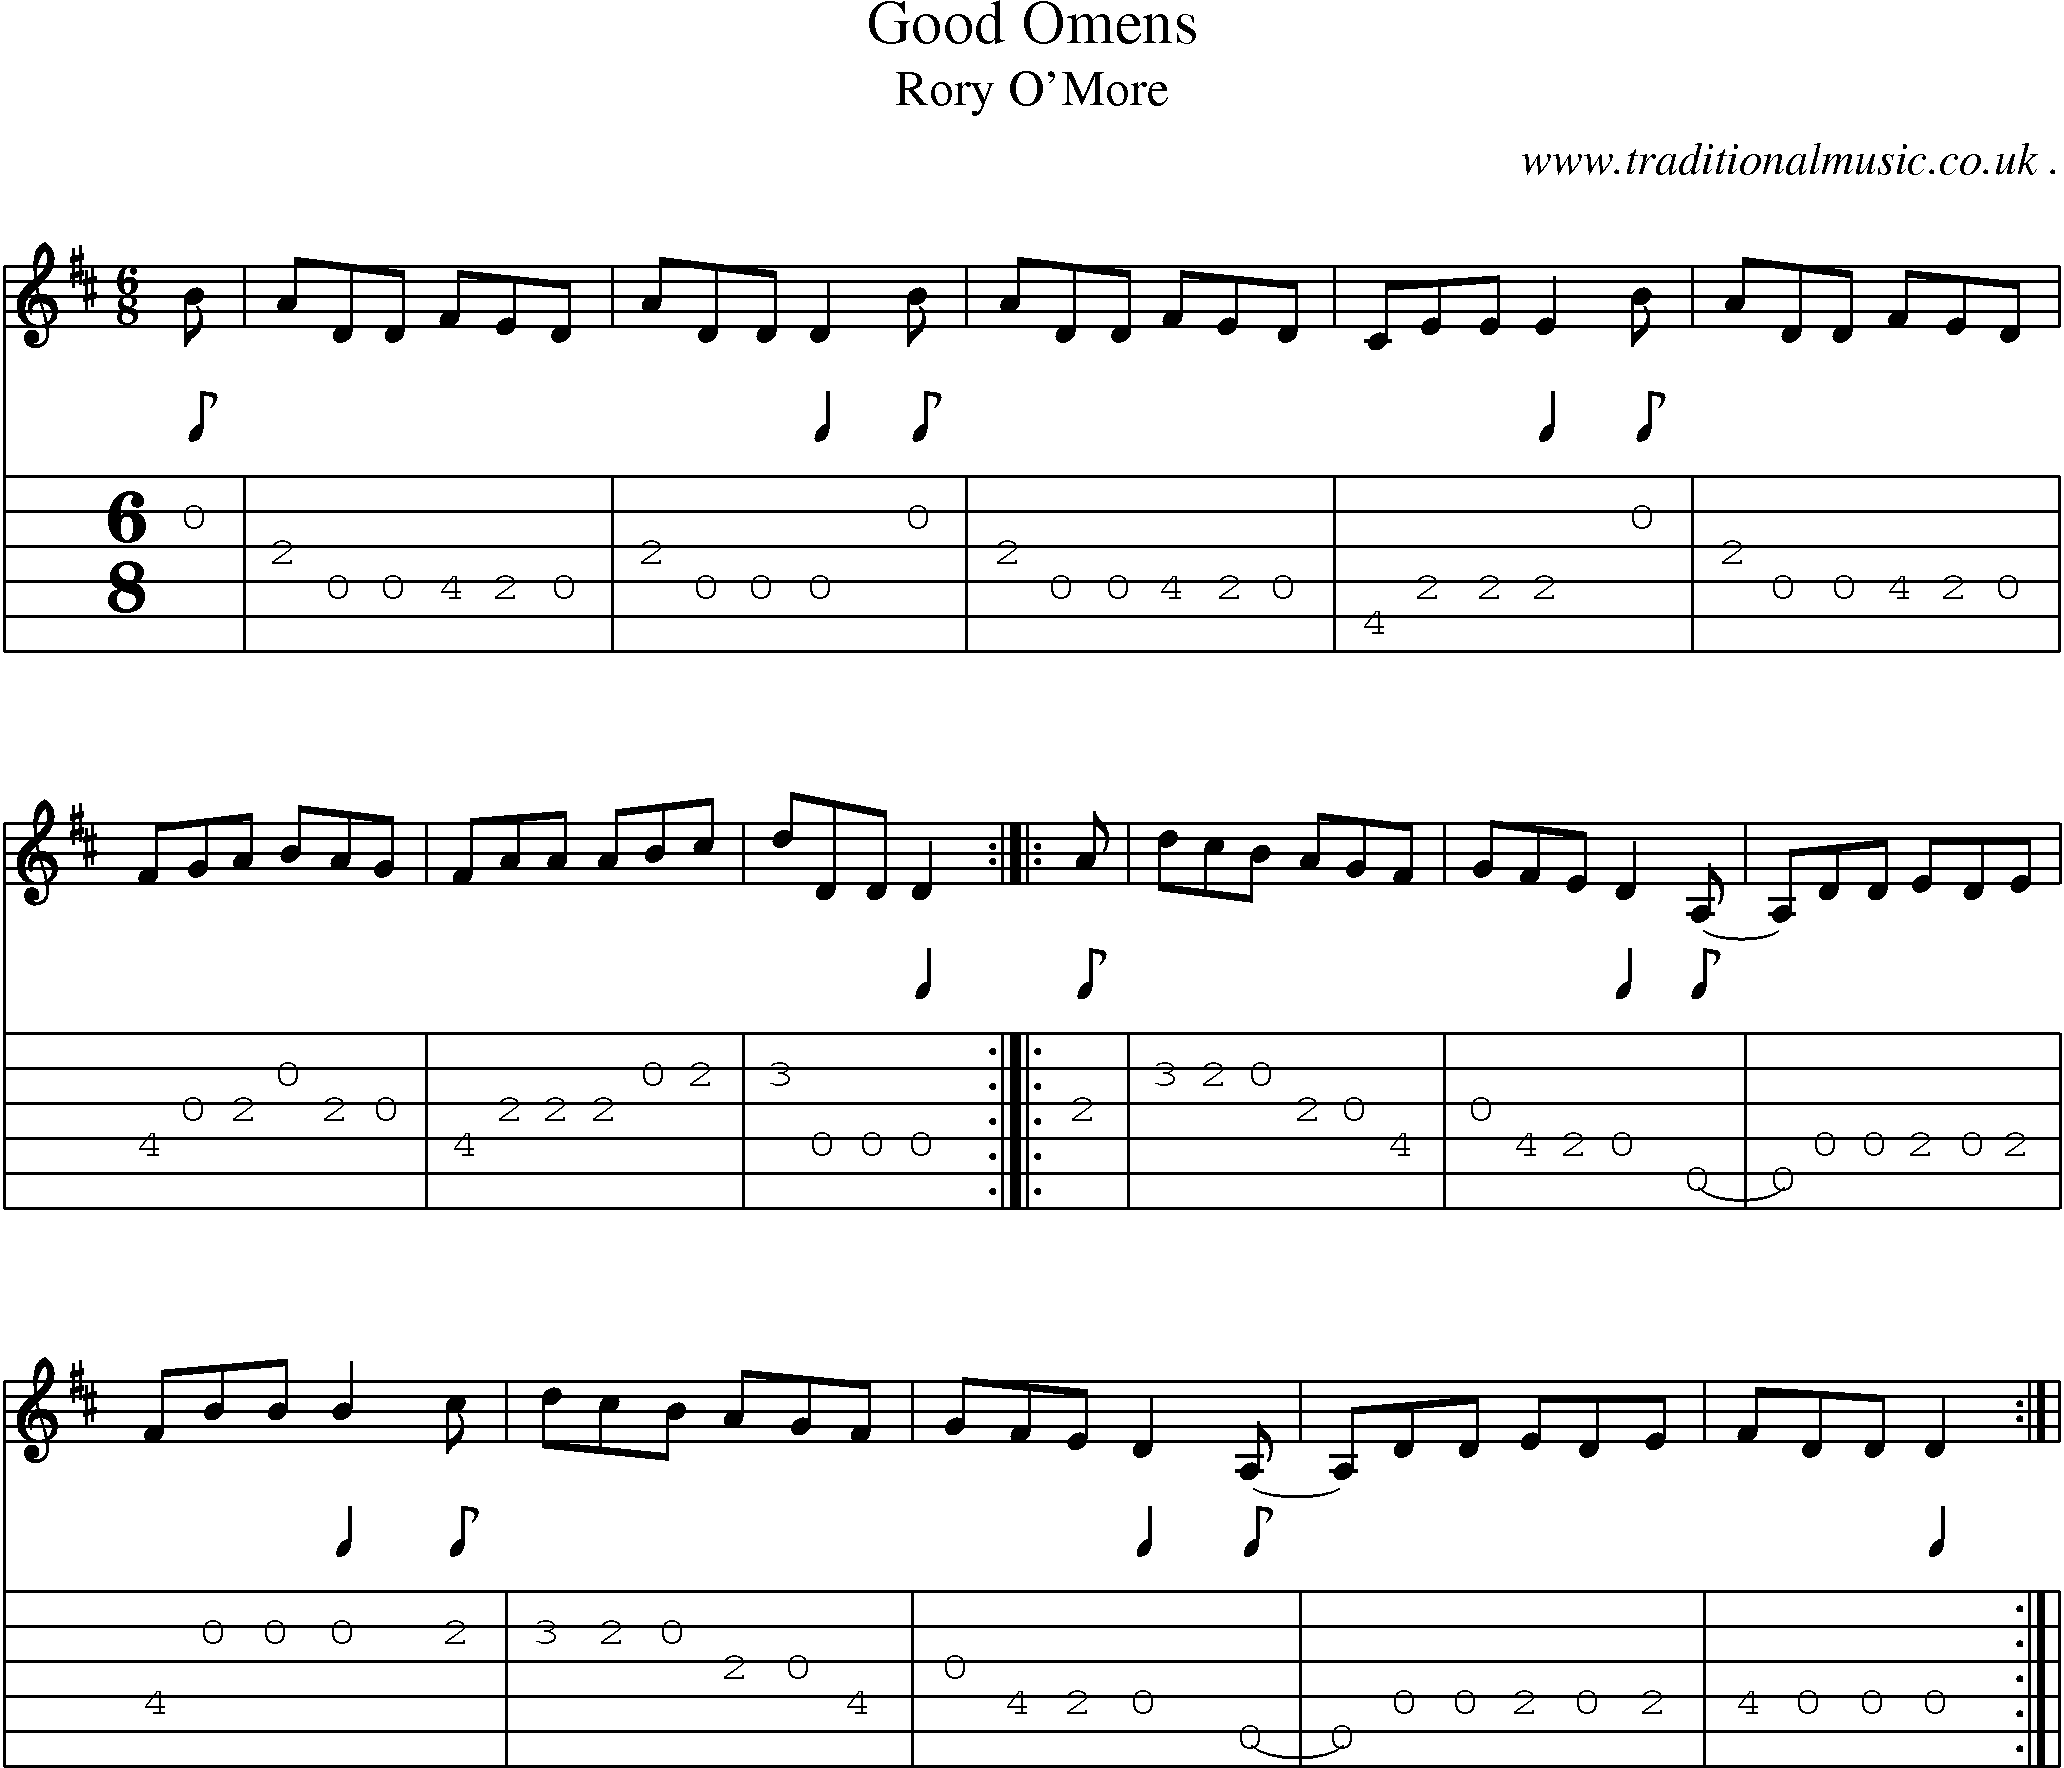 Sheet-Music and Guitar Tabs for Good Omens